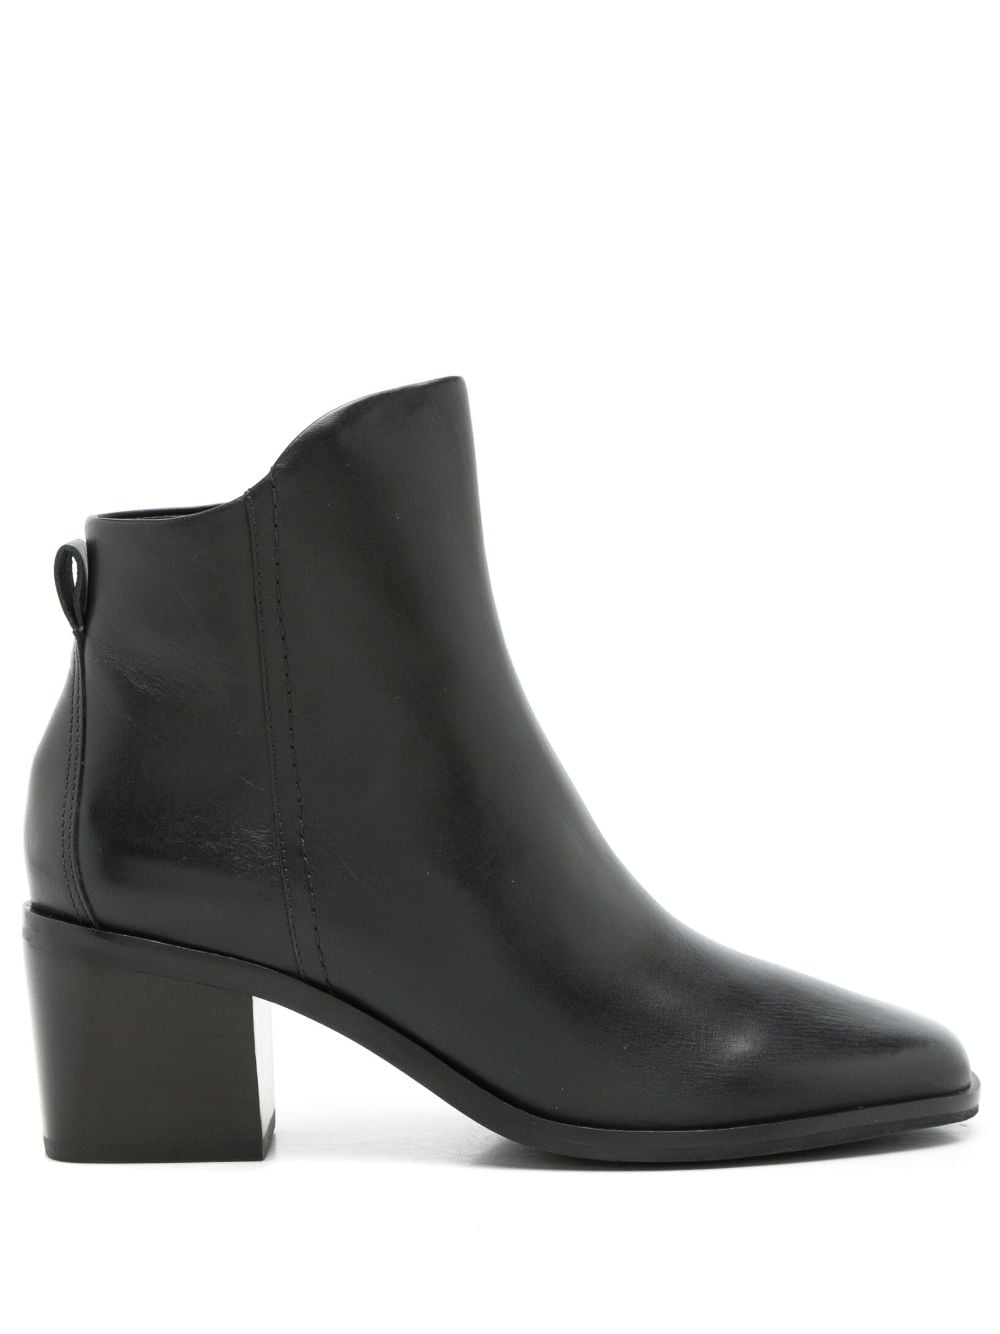 Sarah Chofakian Tilly 40mm Square-toe Boots In Black